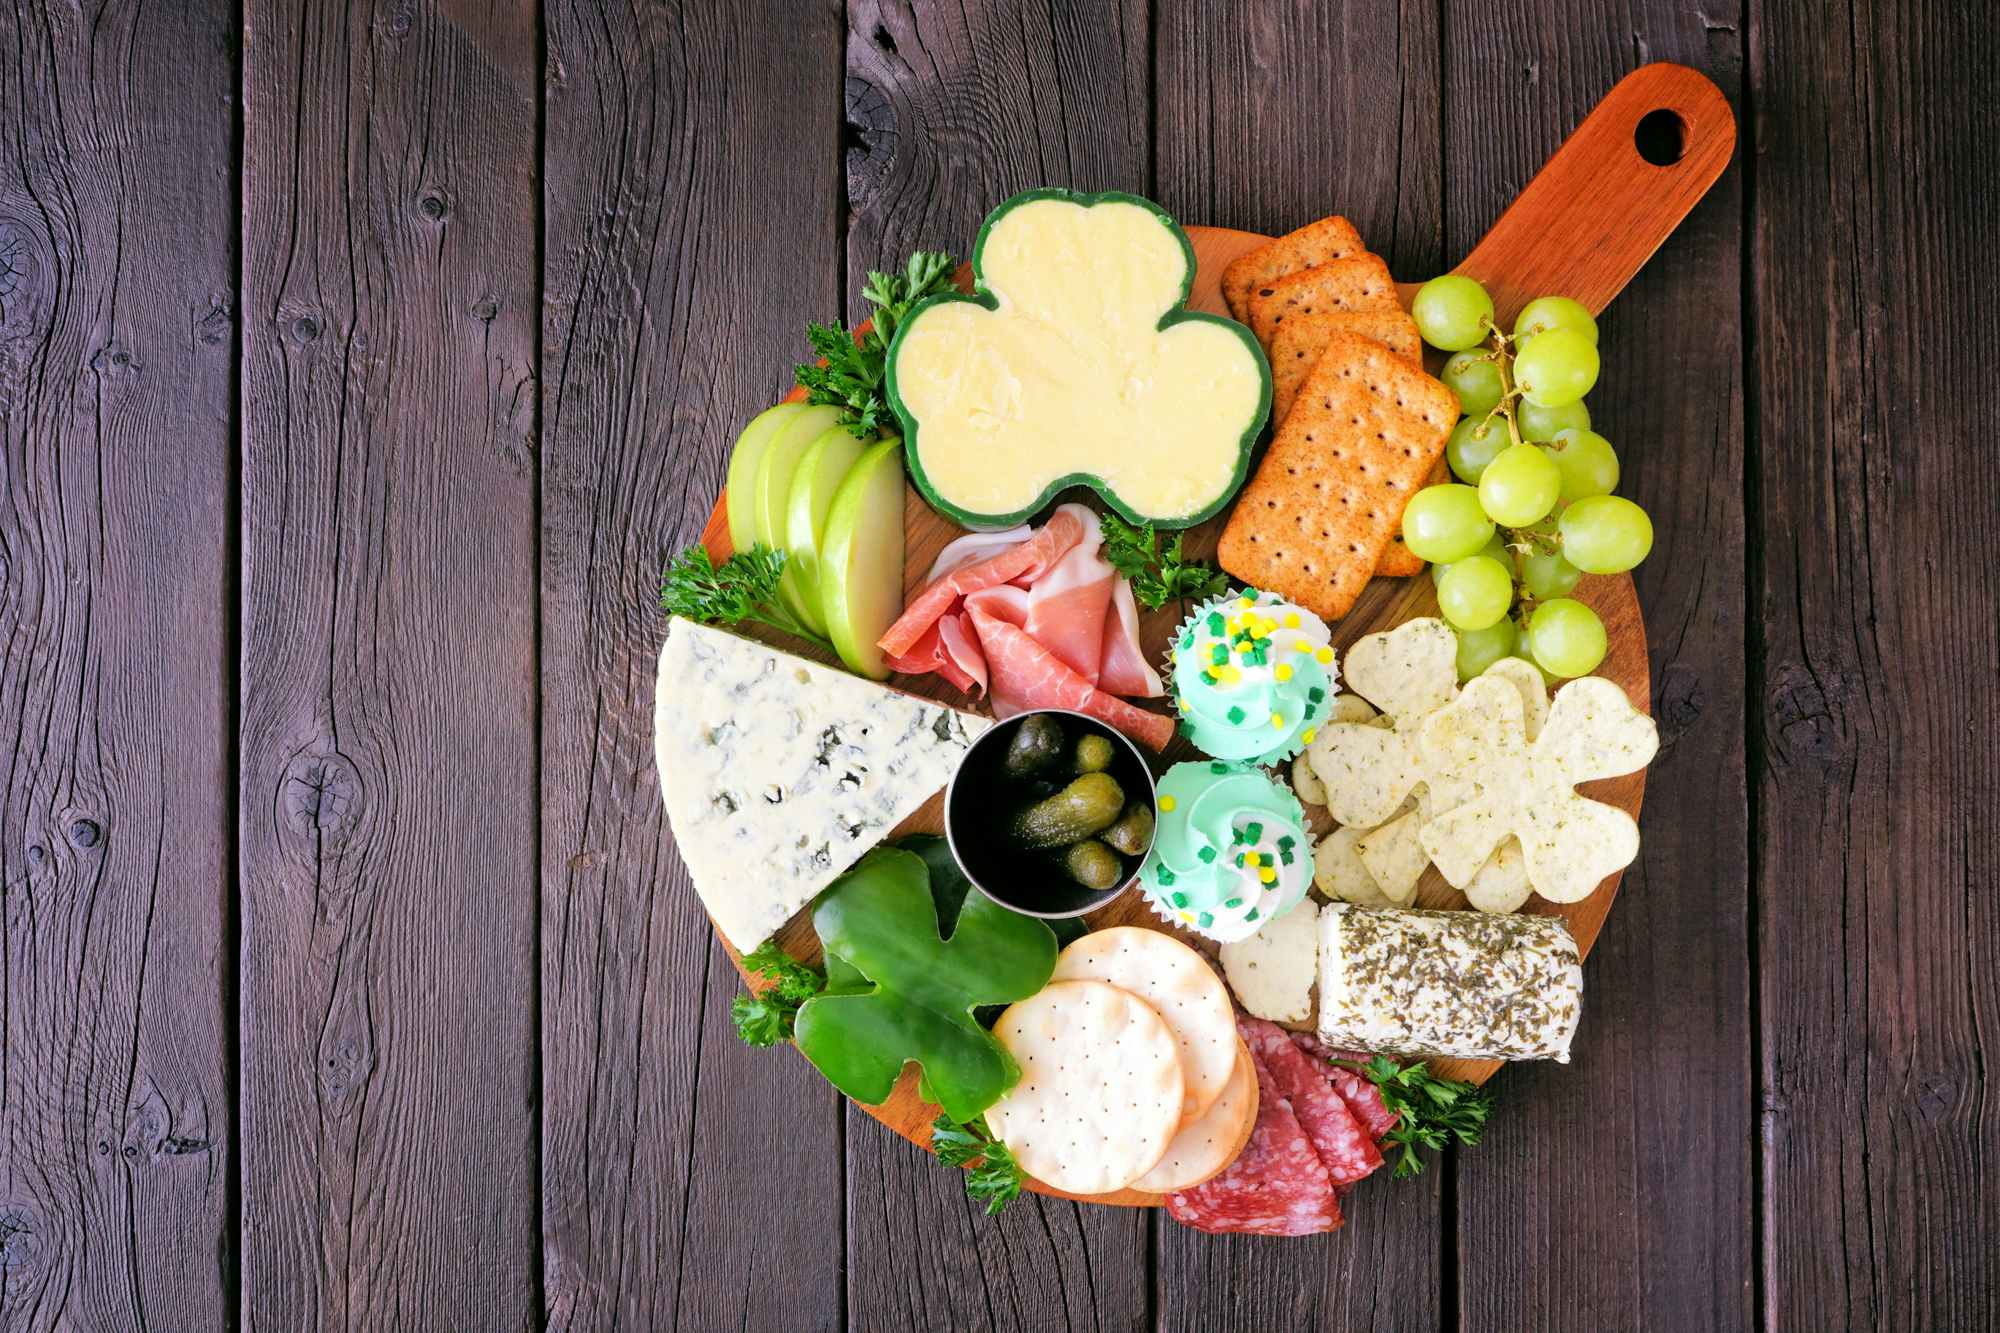 A charcuterie board with shamrock shaped snacks